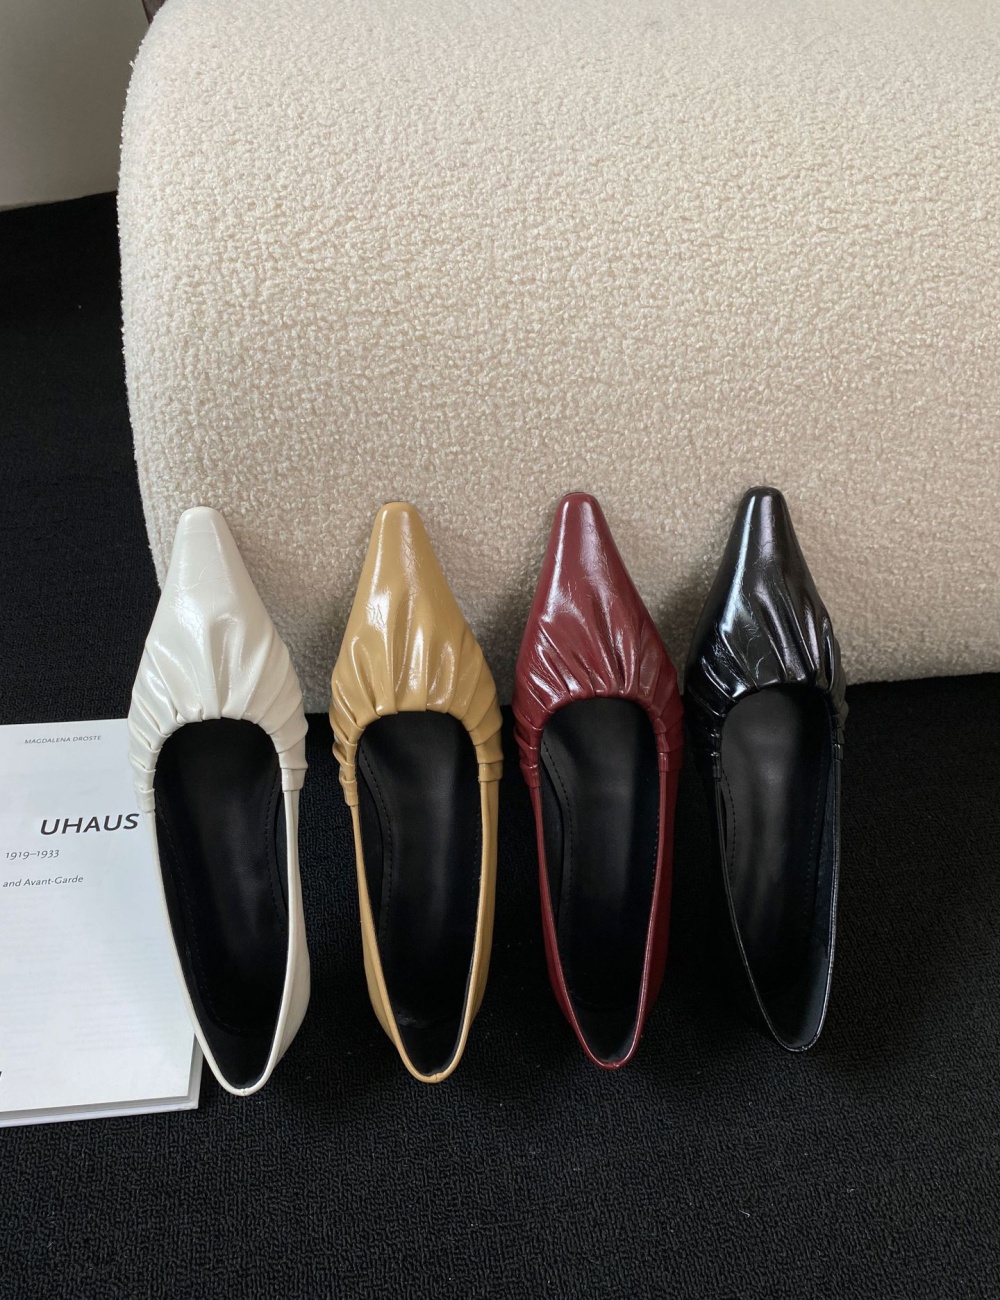 Casual pointed high-heeled shoes fashion shoes